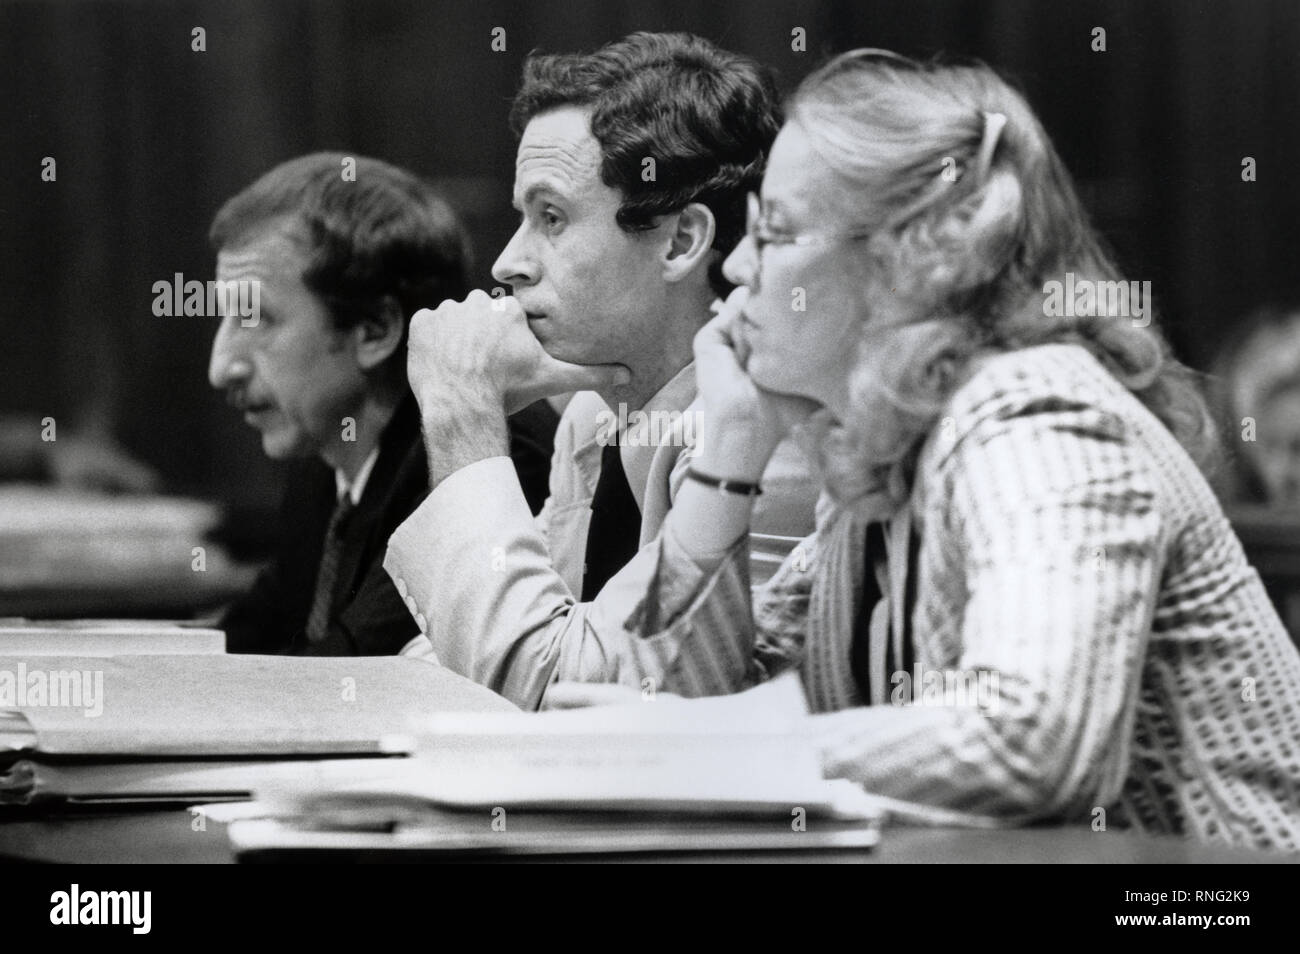 Ted Bundy Murder Trial - Miami - Ted Bundy with defense attorney Margaret Good (right) and Public Defender Michael Minerva (left)  at the defense table. Theodore Robert Bundy was an American serial killer, kidnapper, rapist, burglar, and necrophile who assaulted and murdered numerous young women and girls during the 1970s and possibly earlier. After more than a decade of denials, he confessed to 30 homicides that he committed in seven states between 1974 and 1978. Stock Photo